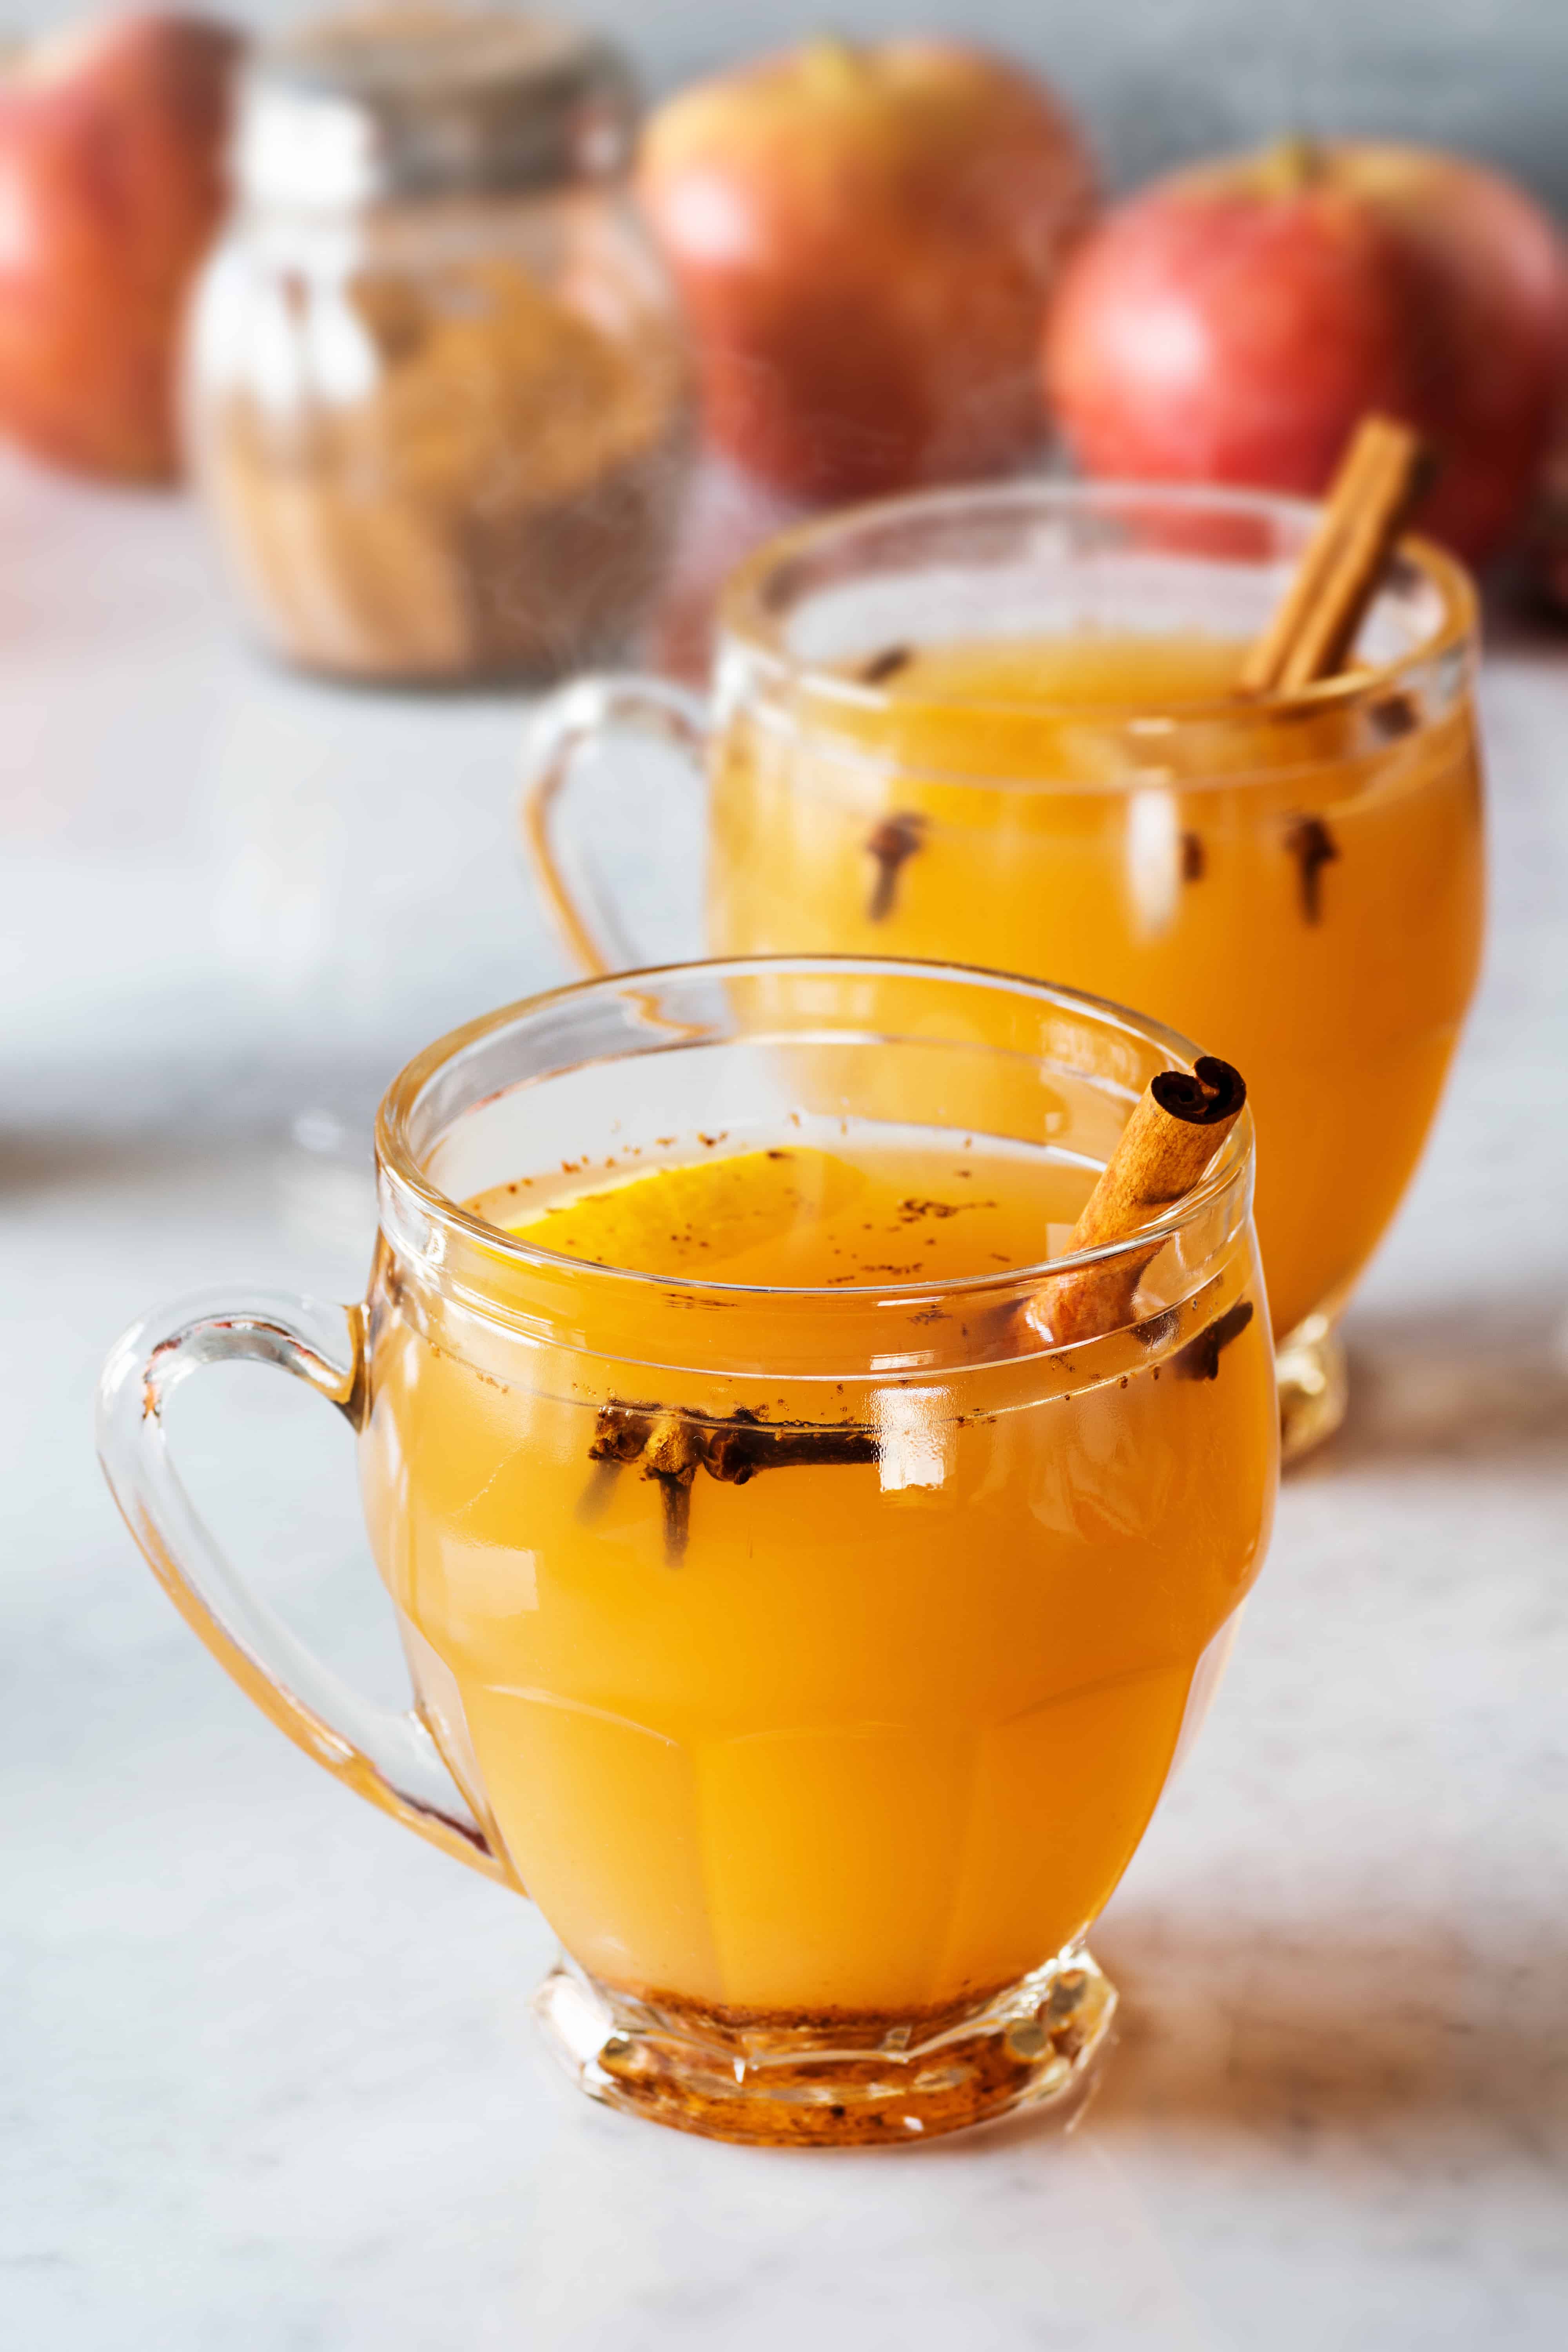 This hot mulled cider recipe helps create a festive atmosphere and is perfect for a cold day or holiday get together. Get the recipe on Made in a Pinch. For more delicious recipes and helpful tips follow us on Pinterest!